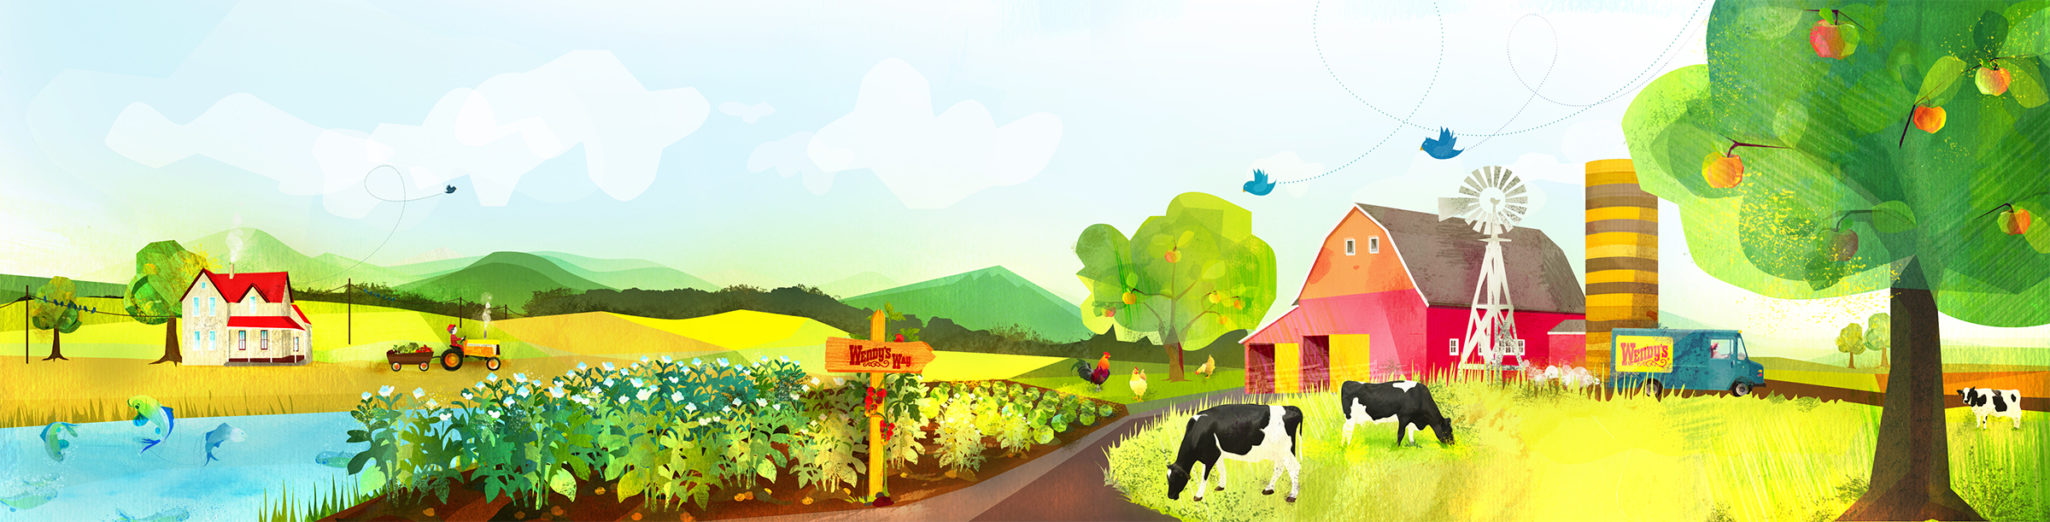 Panoramic illustration showing wendy's farm